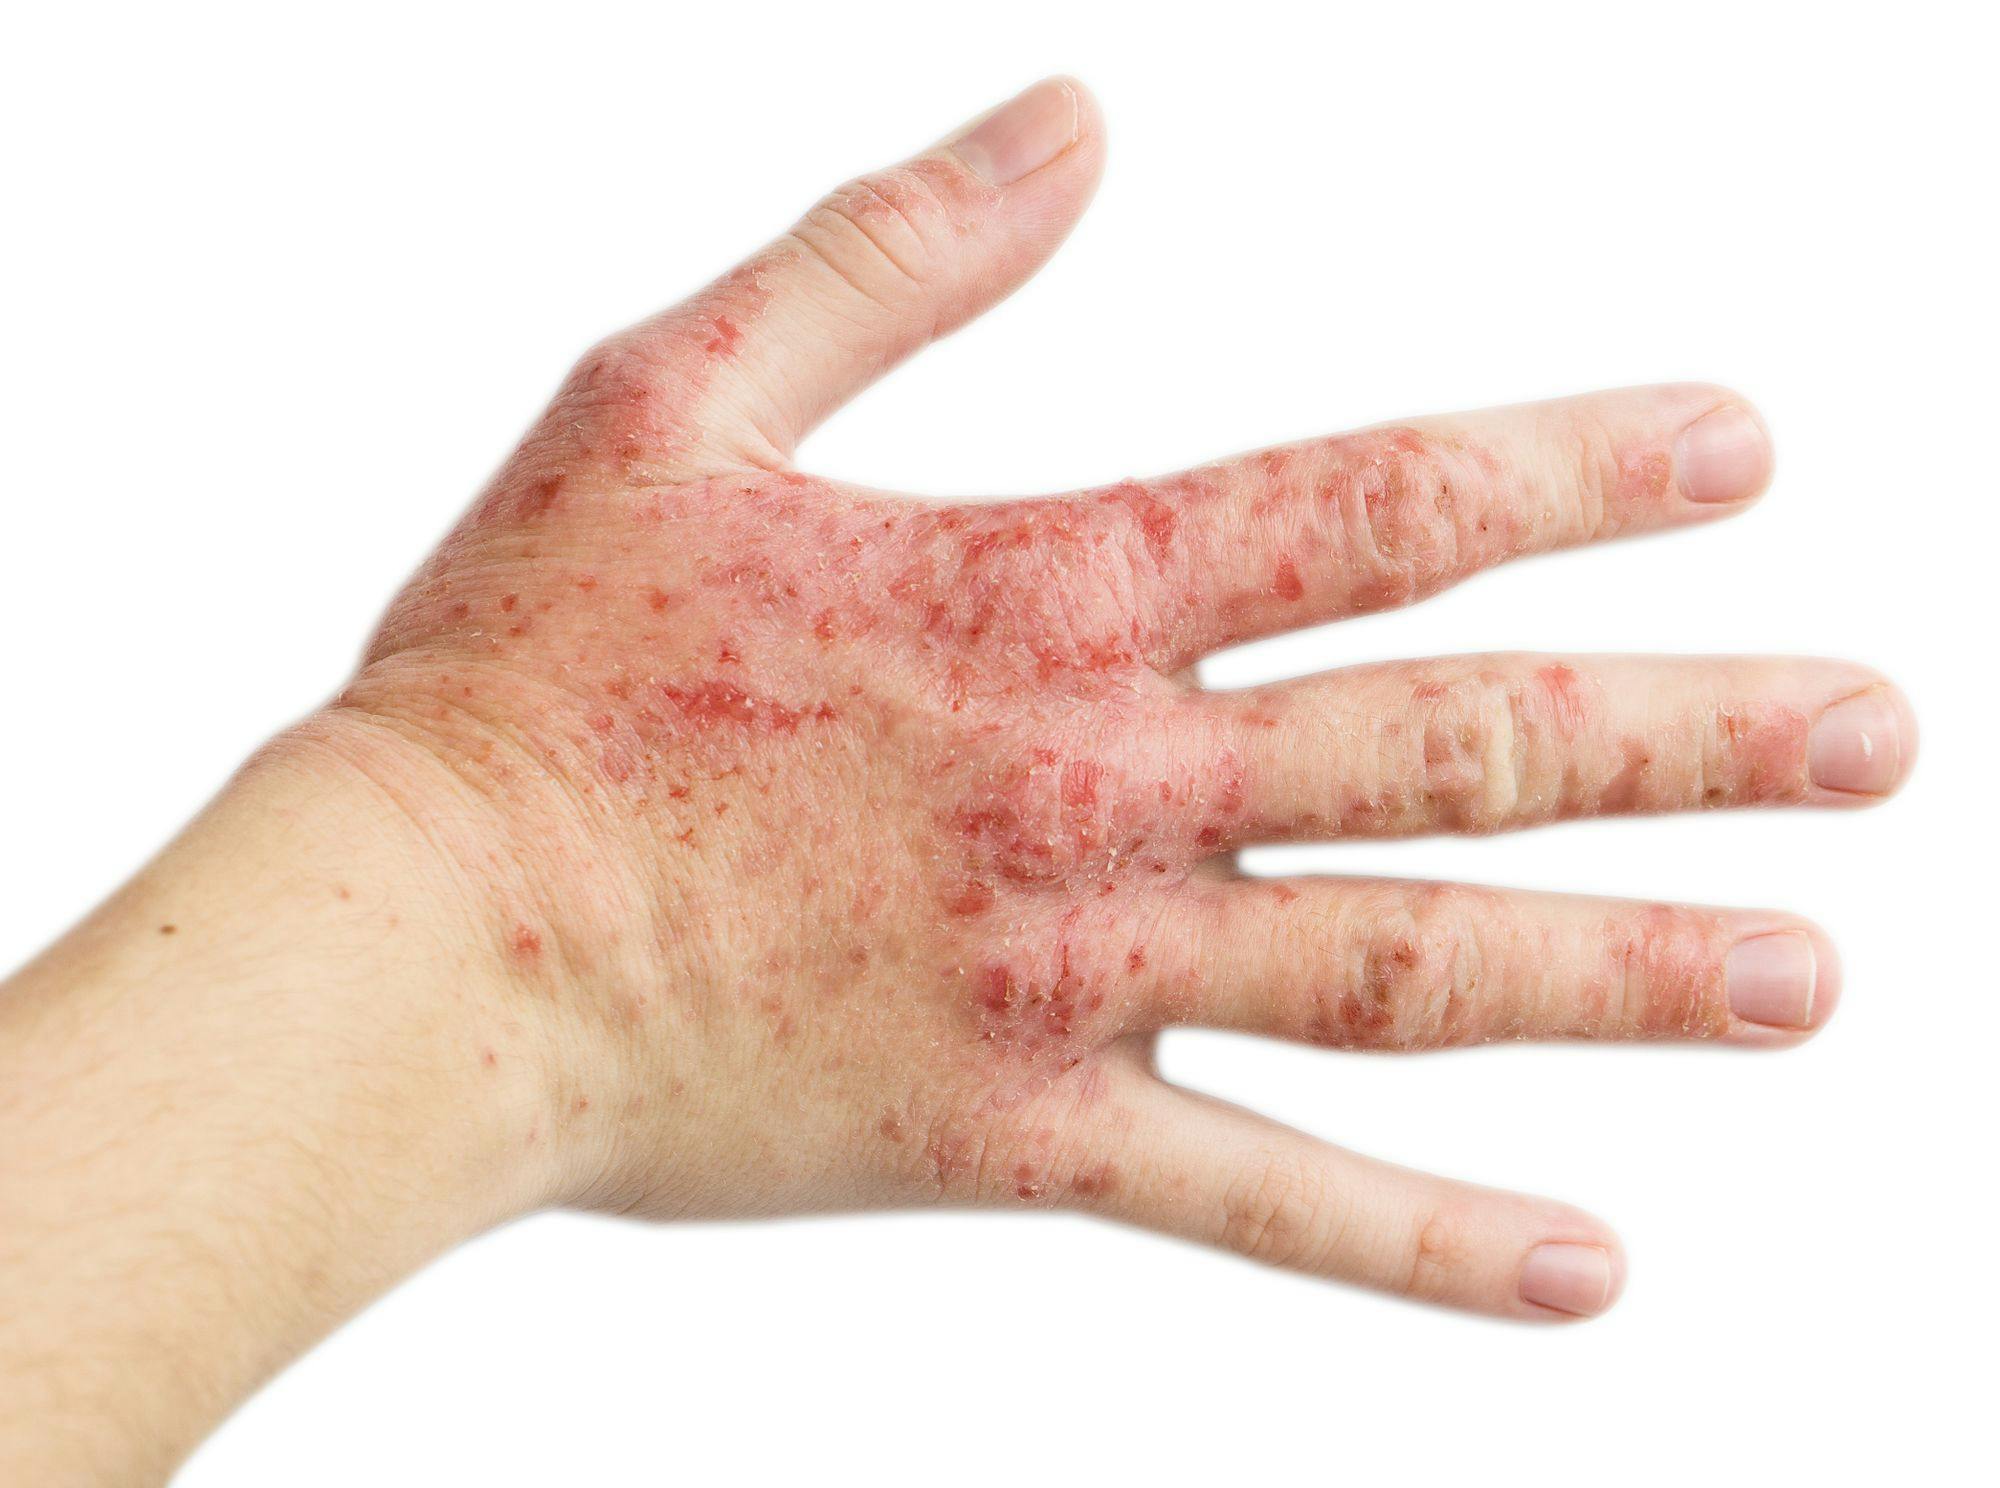 A right hand of a woman with eczema on it | Image credit: Injenerker - gettyimages.com